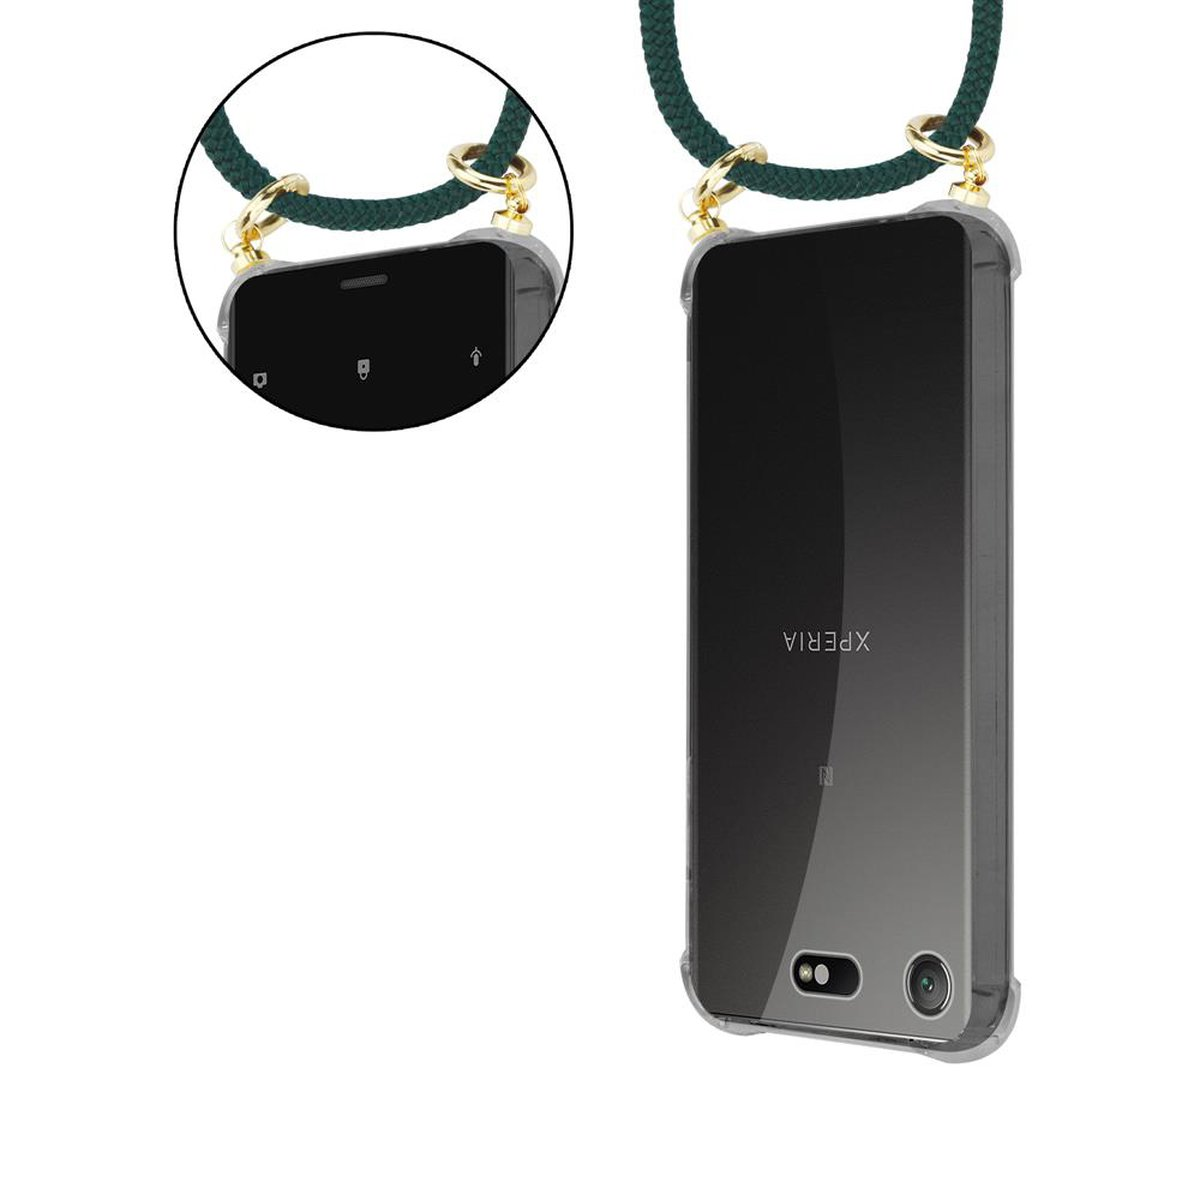 ARMEE Gold Sony, CADORABO abnehmbarer Xperia Kordel Kette mit Hülle, Ringen, XZ1 GRÜN Handy Band Backcover, und COMPACT,